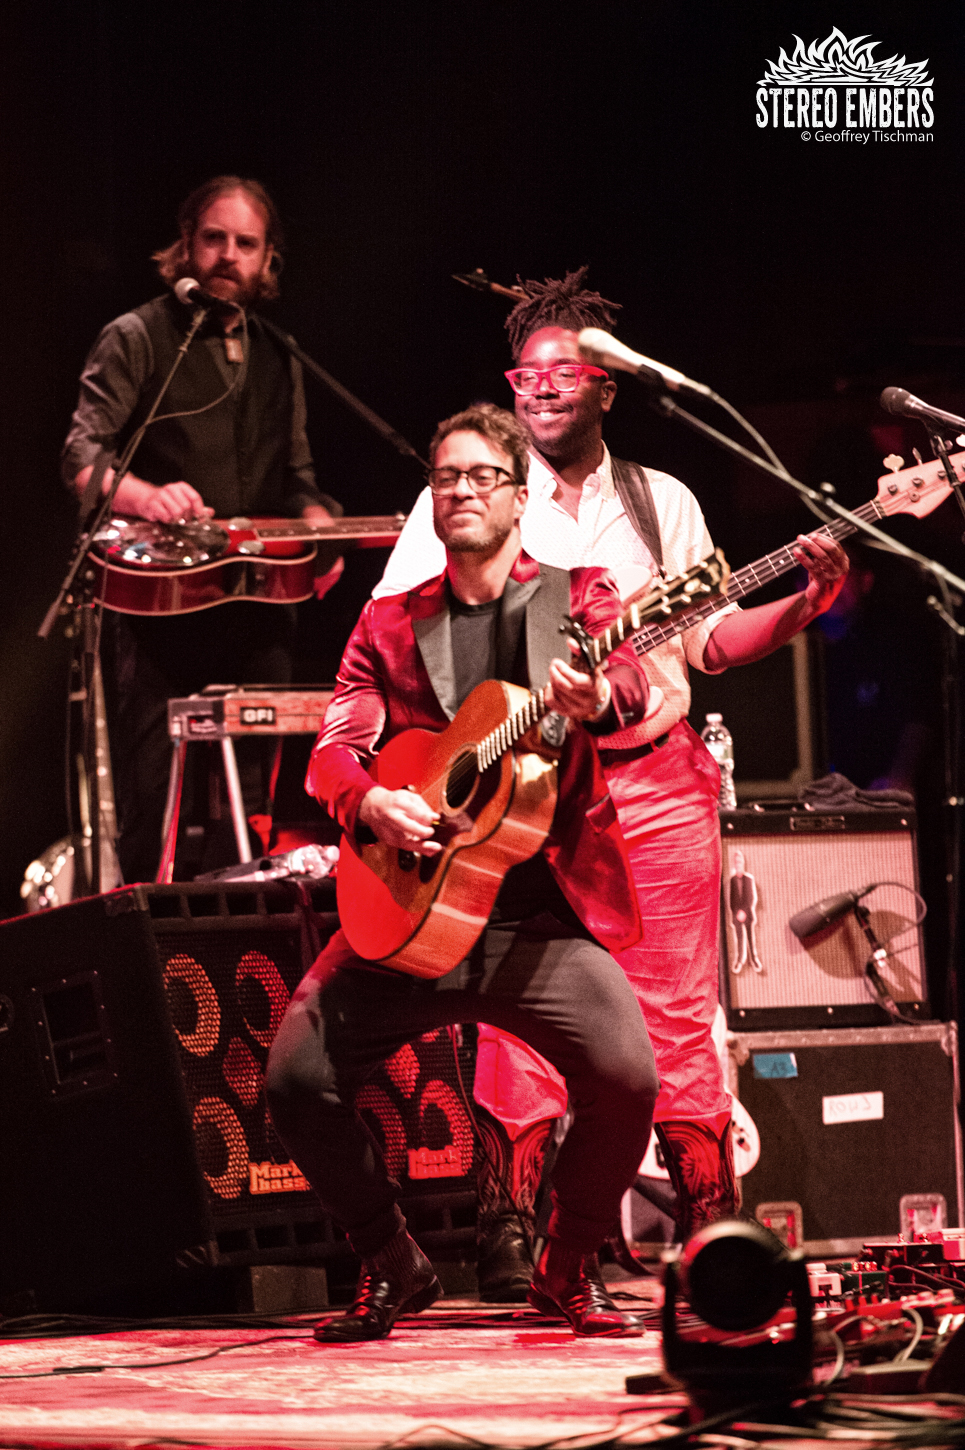 Amos Lee Live At The Capitol Theatre, New York - Stereo Embers Magazine  Stereo Embers Magazine